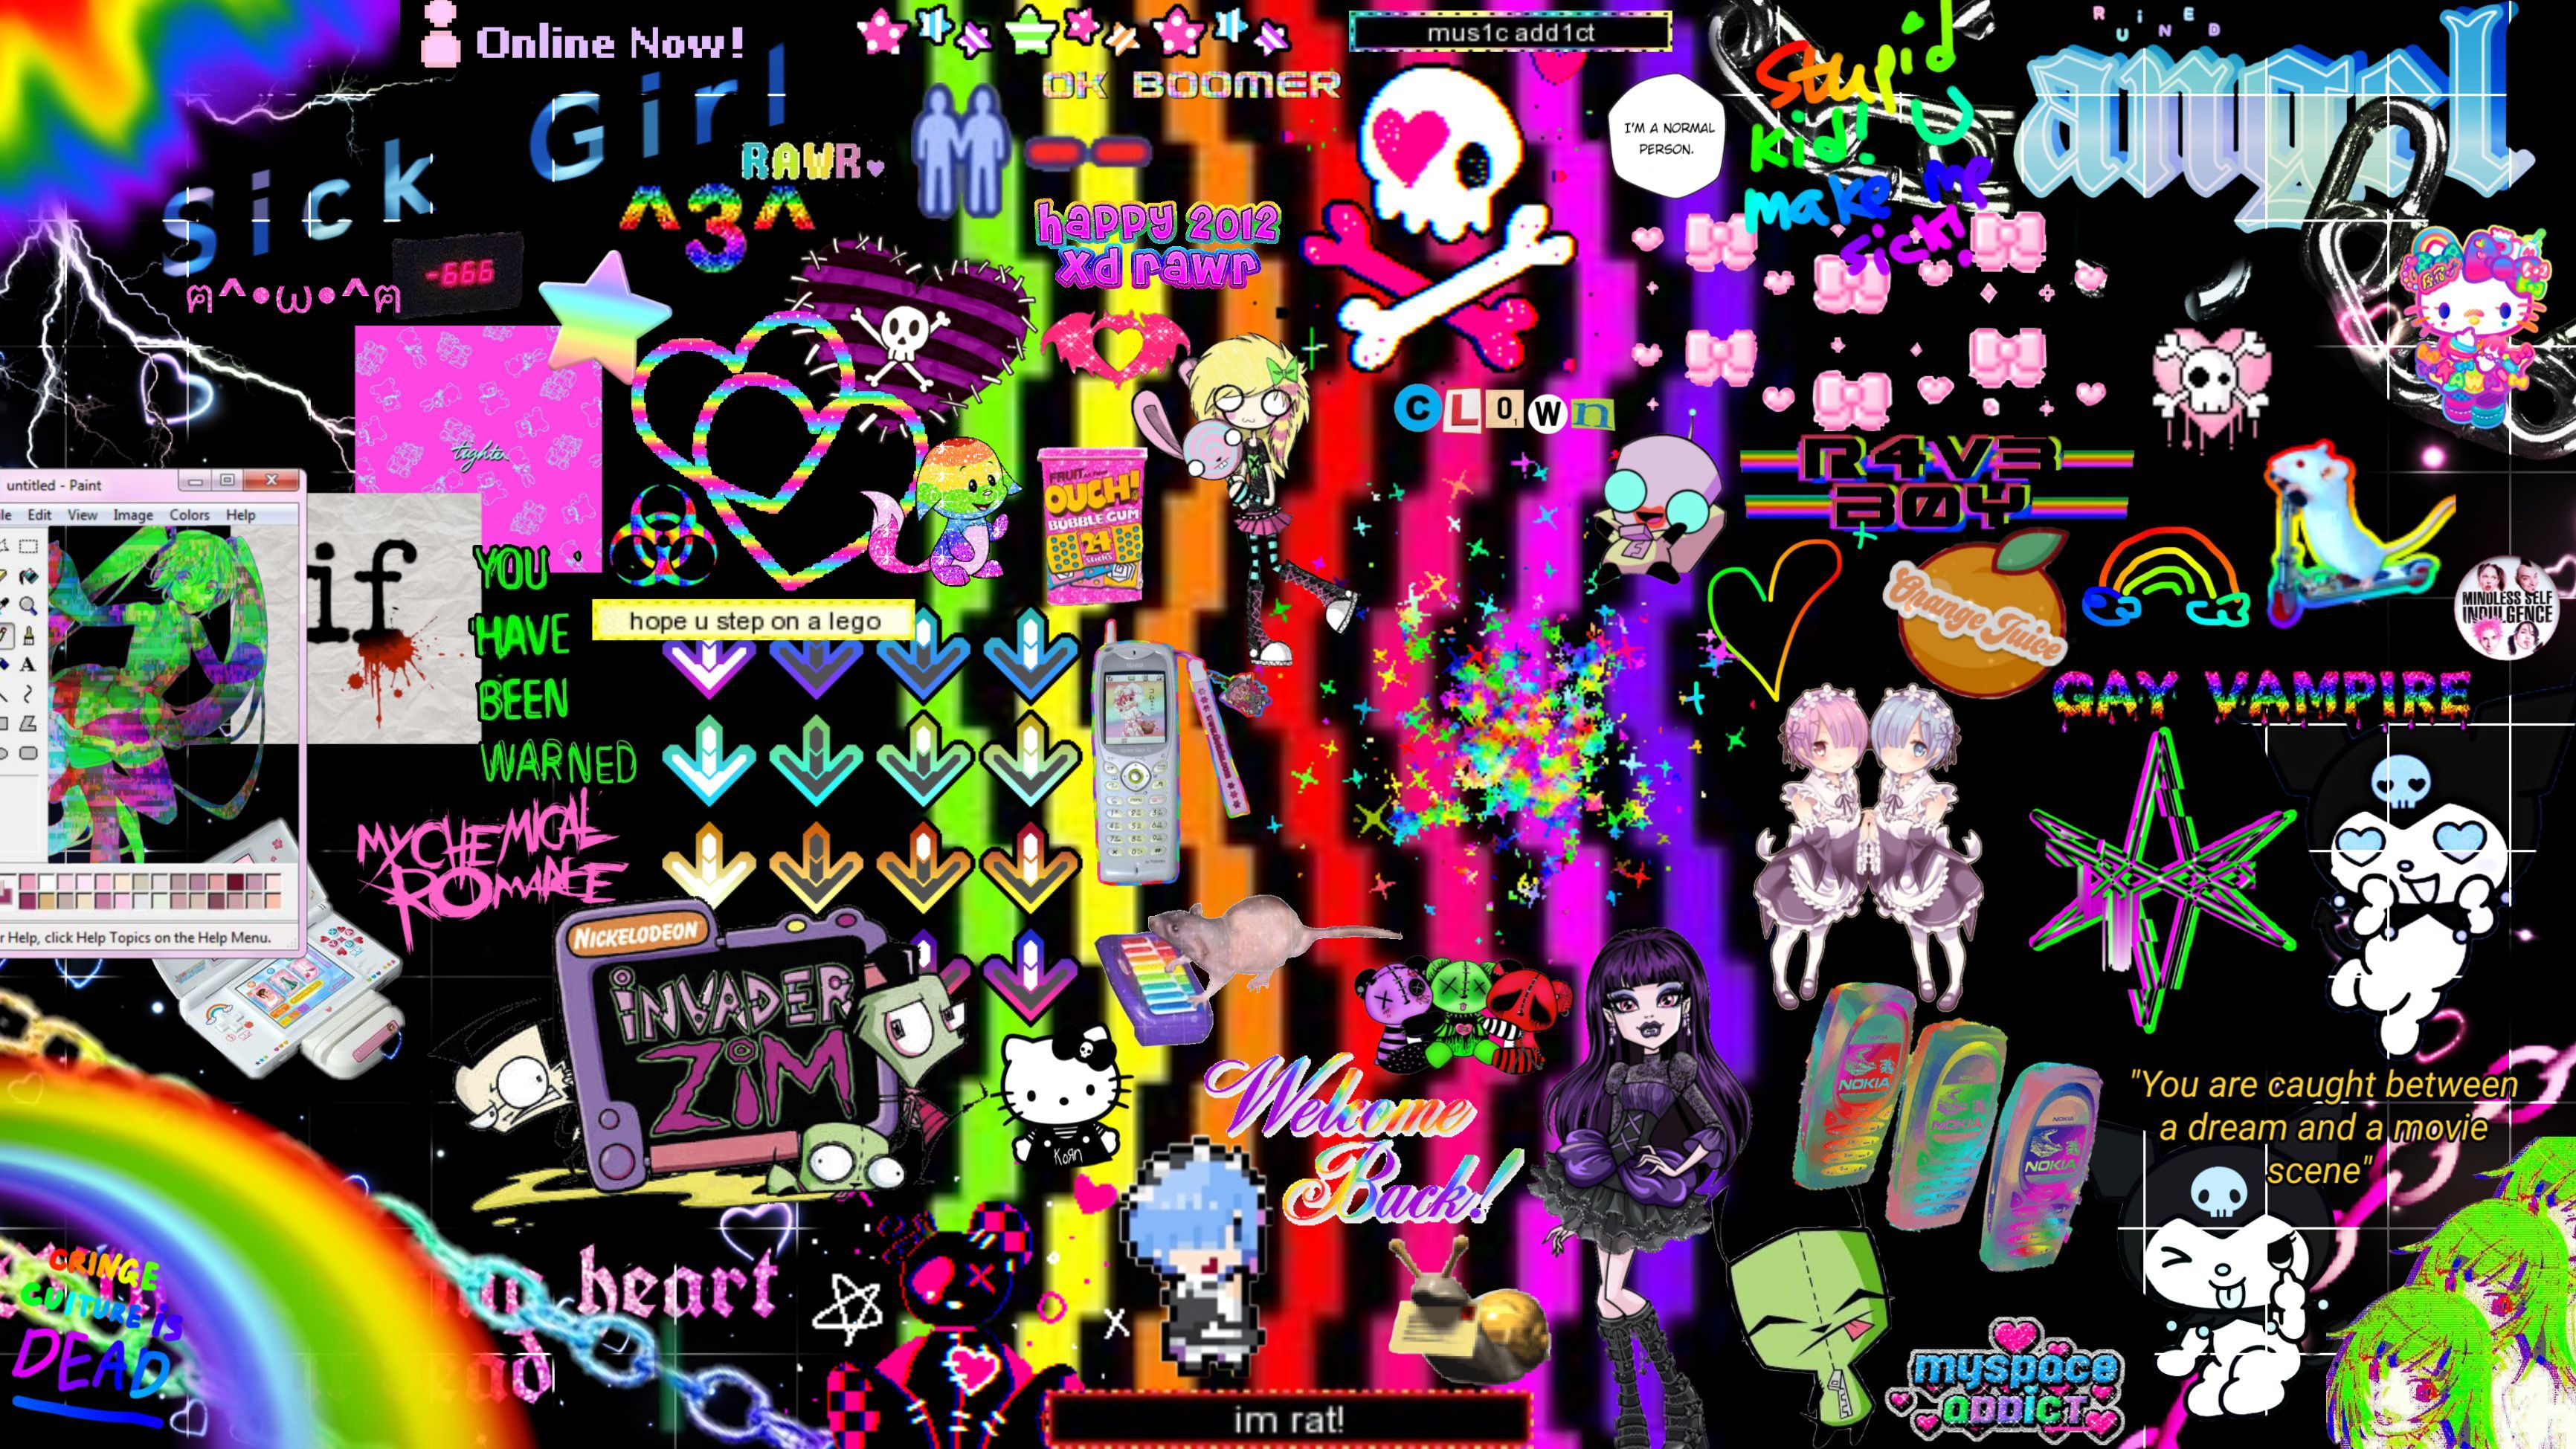 A collage of neon and rainbow graphics, including images of anime characters, text that says 